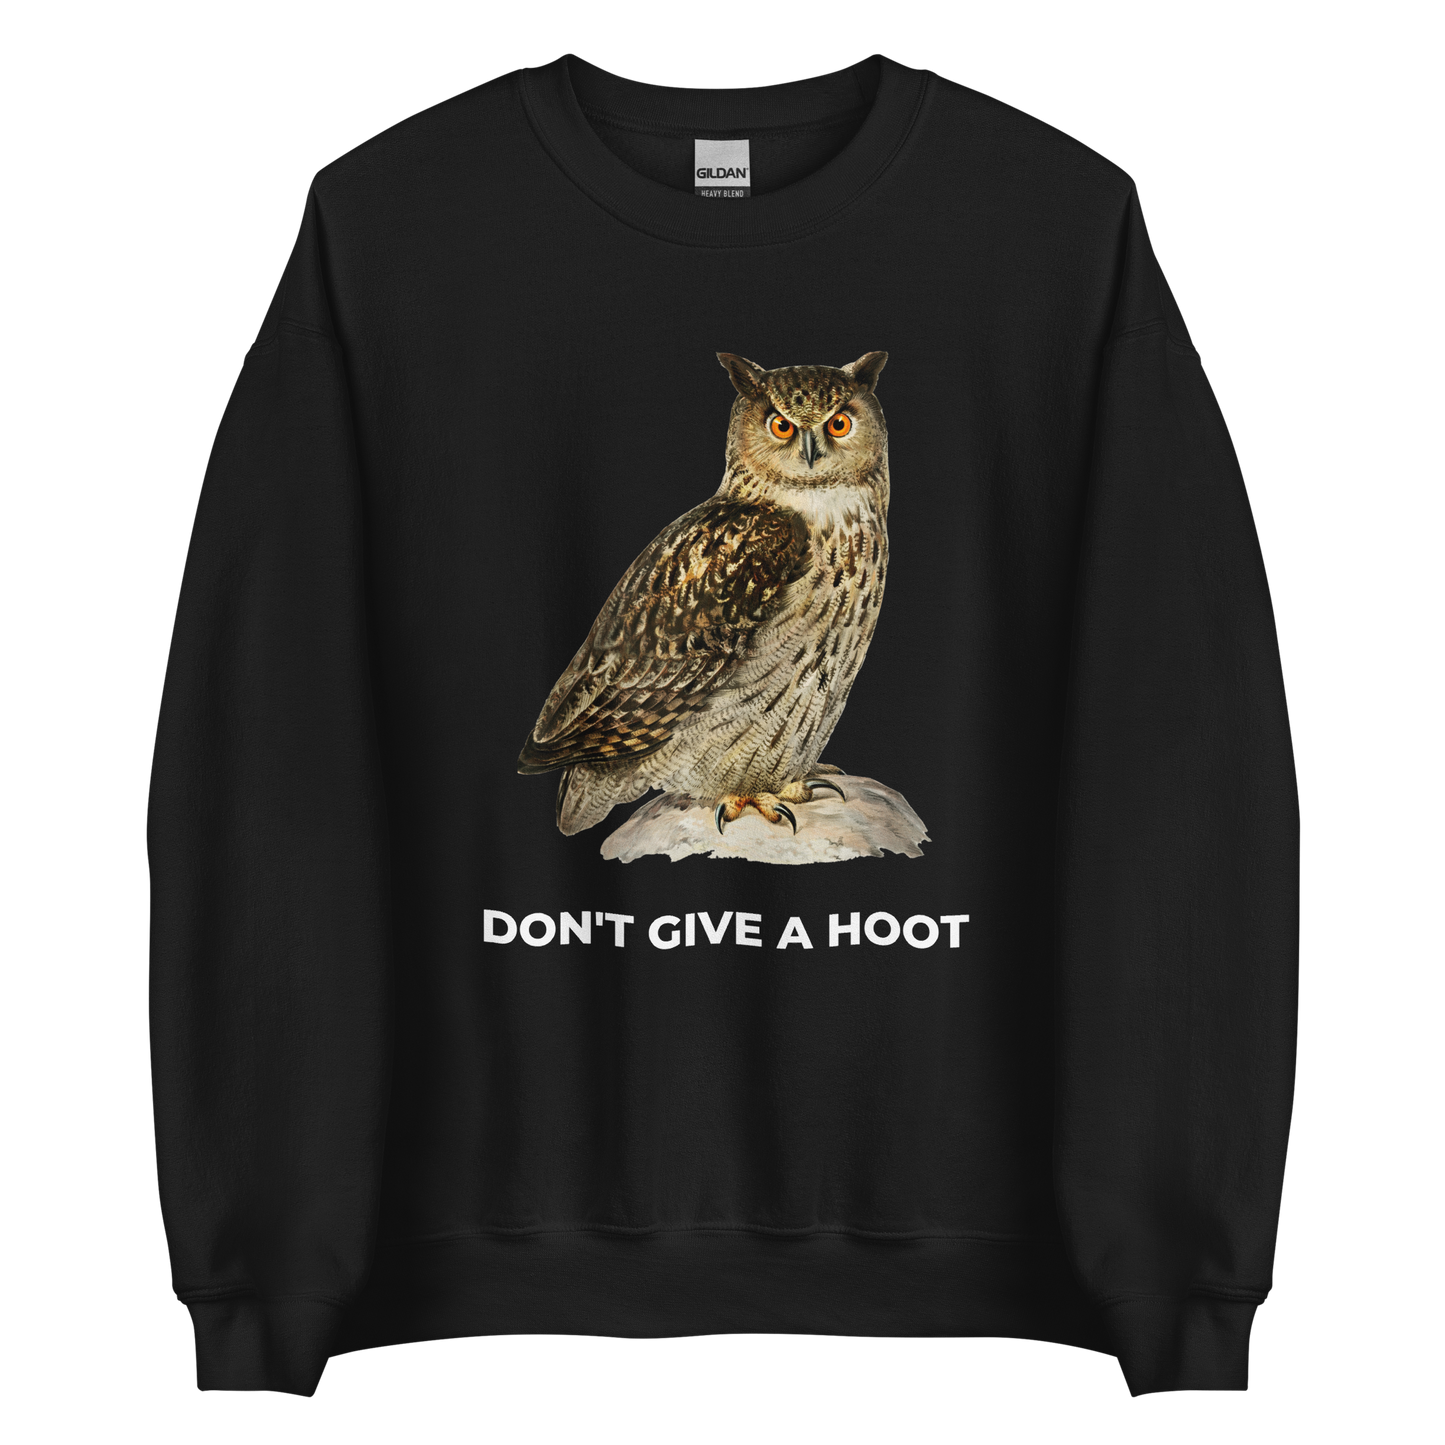 Black Owl Sweatshirt featuring a captivating Don't Give a Hoot graphic on the chest - Funny Graphic Owl Sweatshirts - Boozy Fox